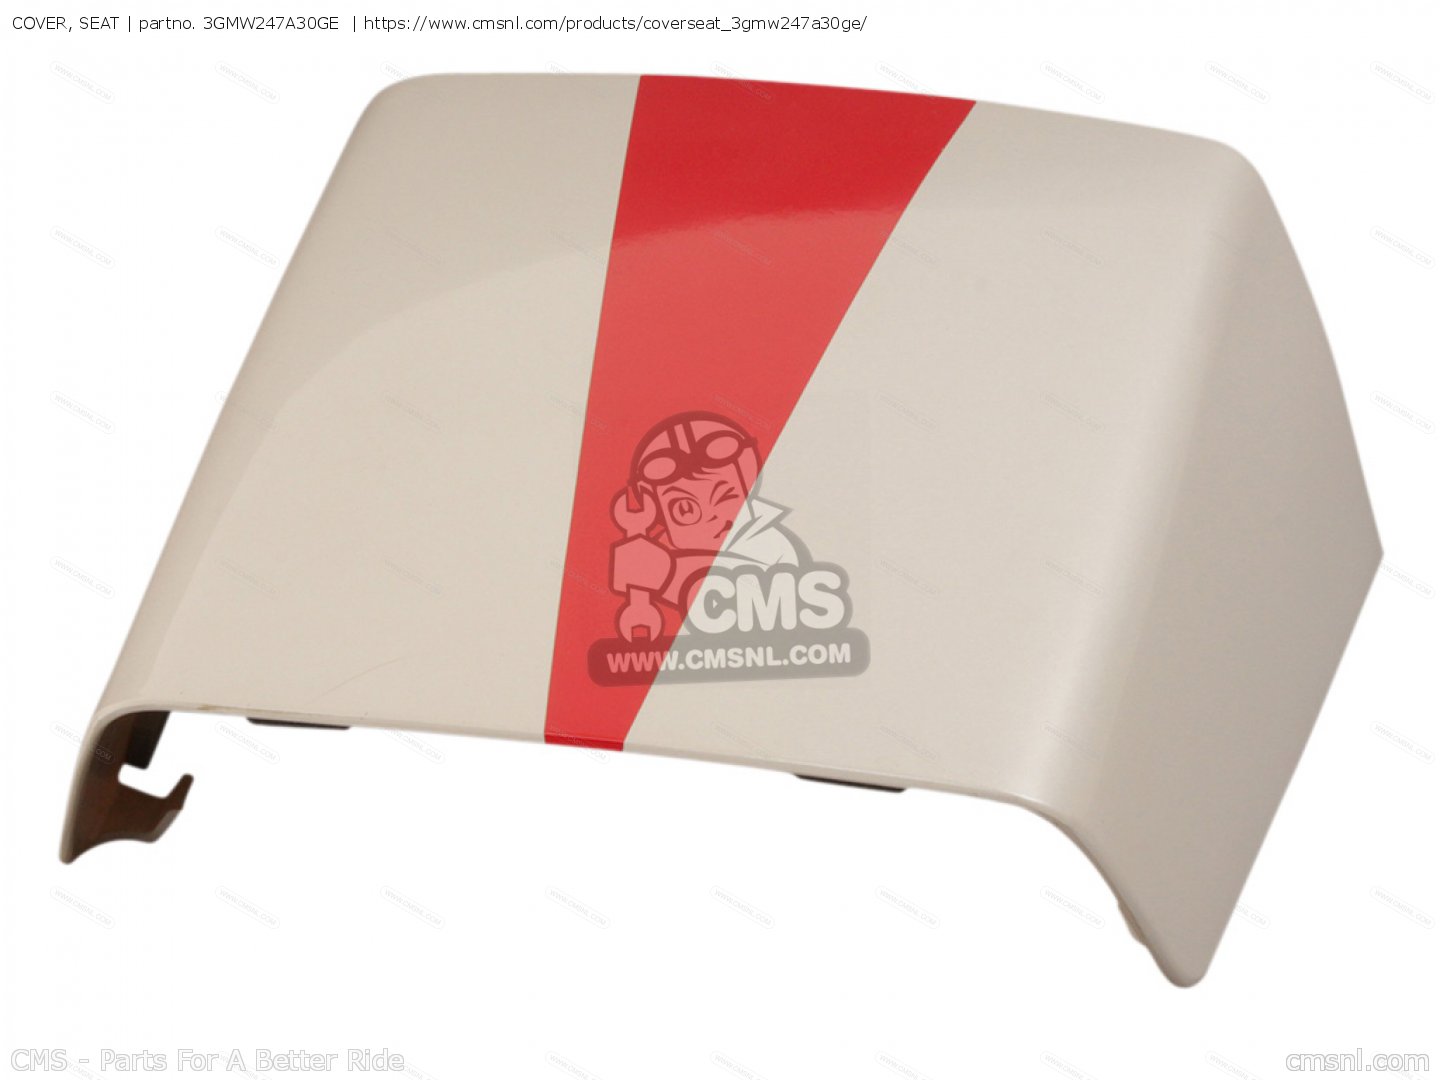 3GMW247A30GE: Cover, Seat Yamaha - buy the 3GM-W247A-30-GE at CMSNL